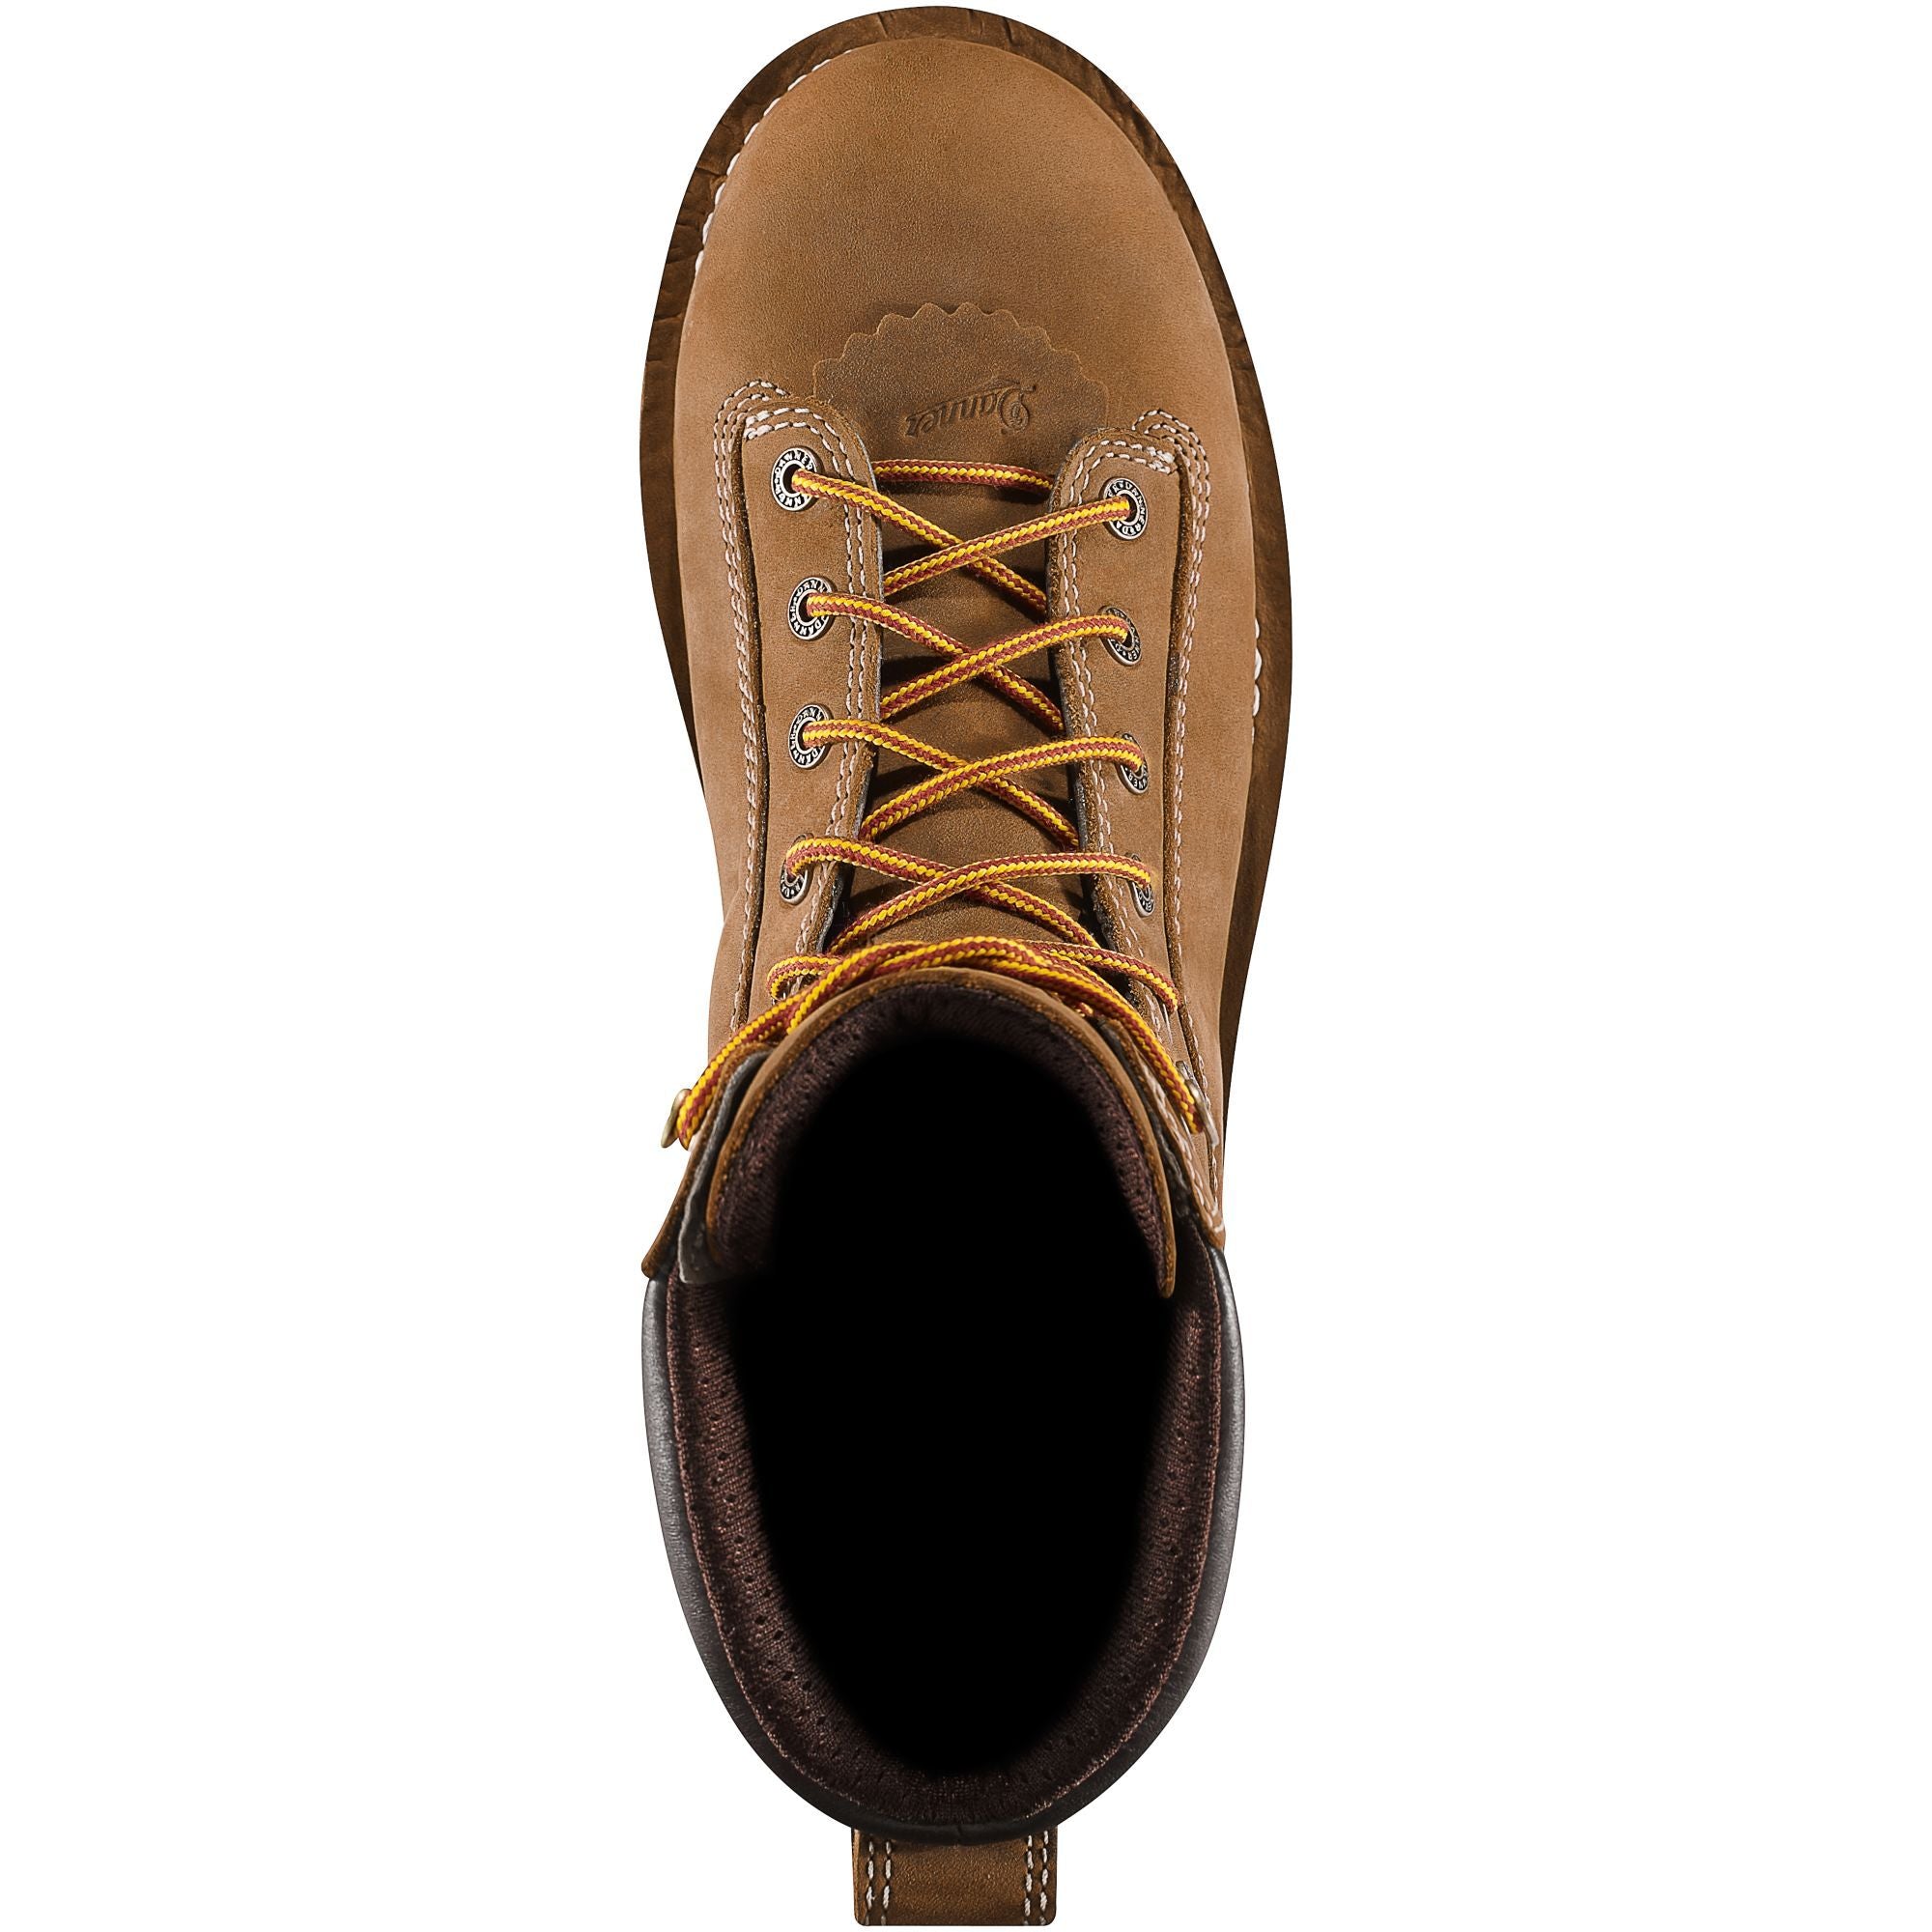 Danner Men's Quarry USA Made 8" Alloy Toe WP Work Boot - Brown - 17317  - Overlook Boots